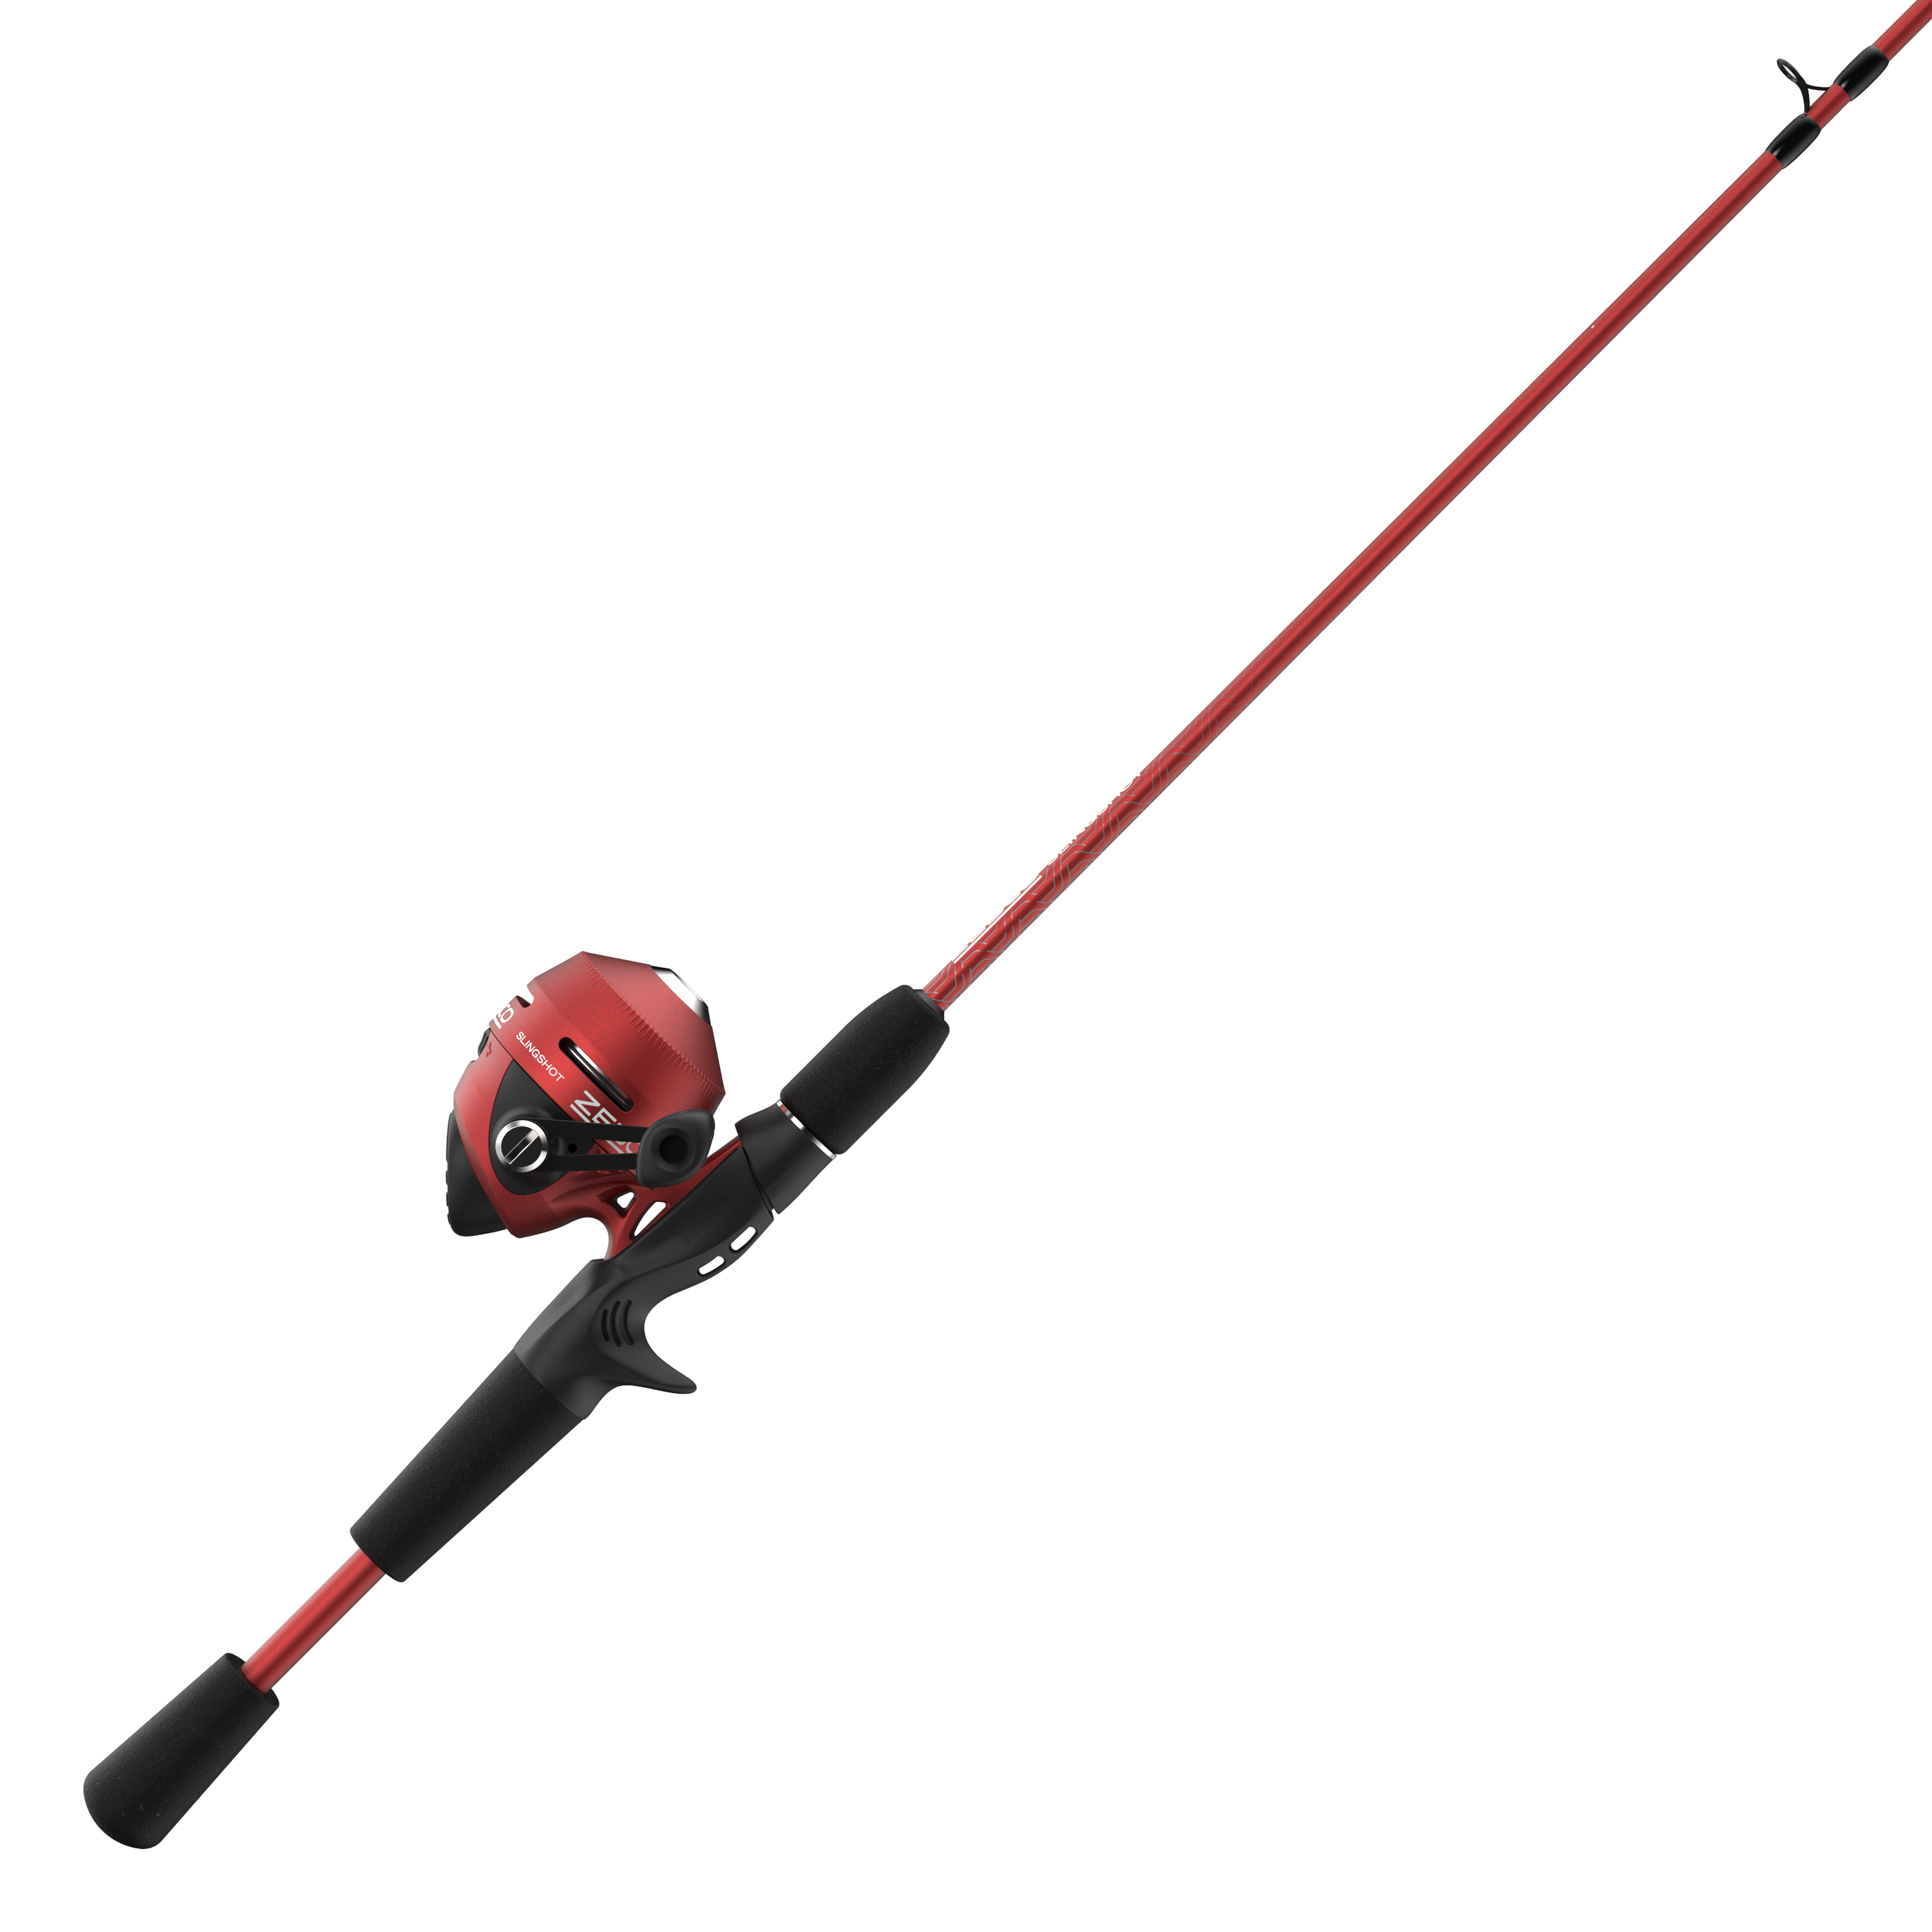 Zebco 202 Spincast Rod and Reel Combo with Tackle Kit - Pink, Right